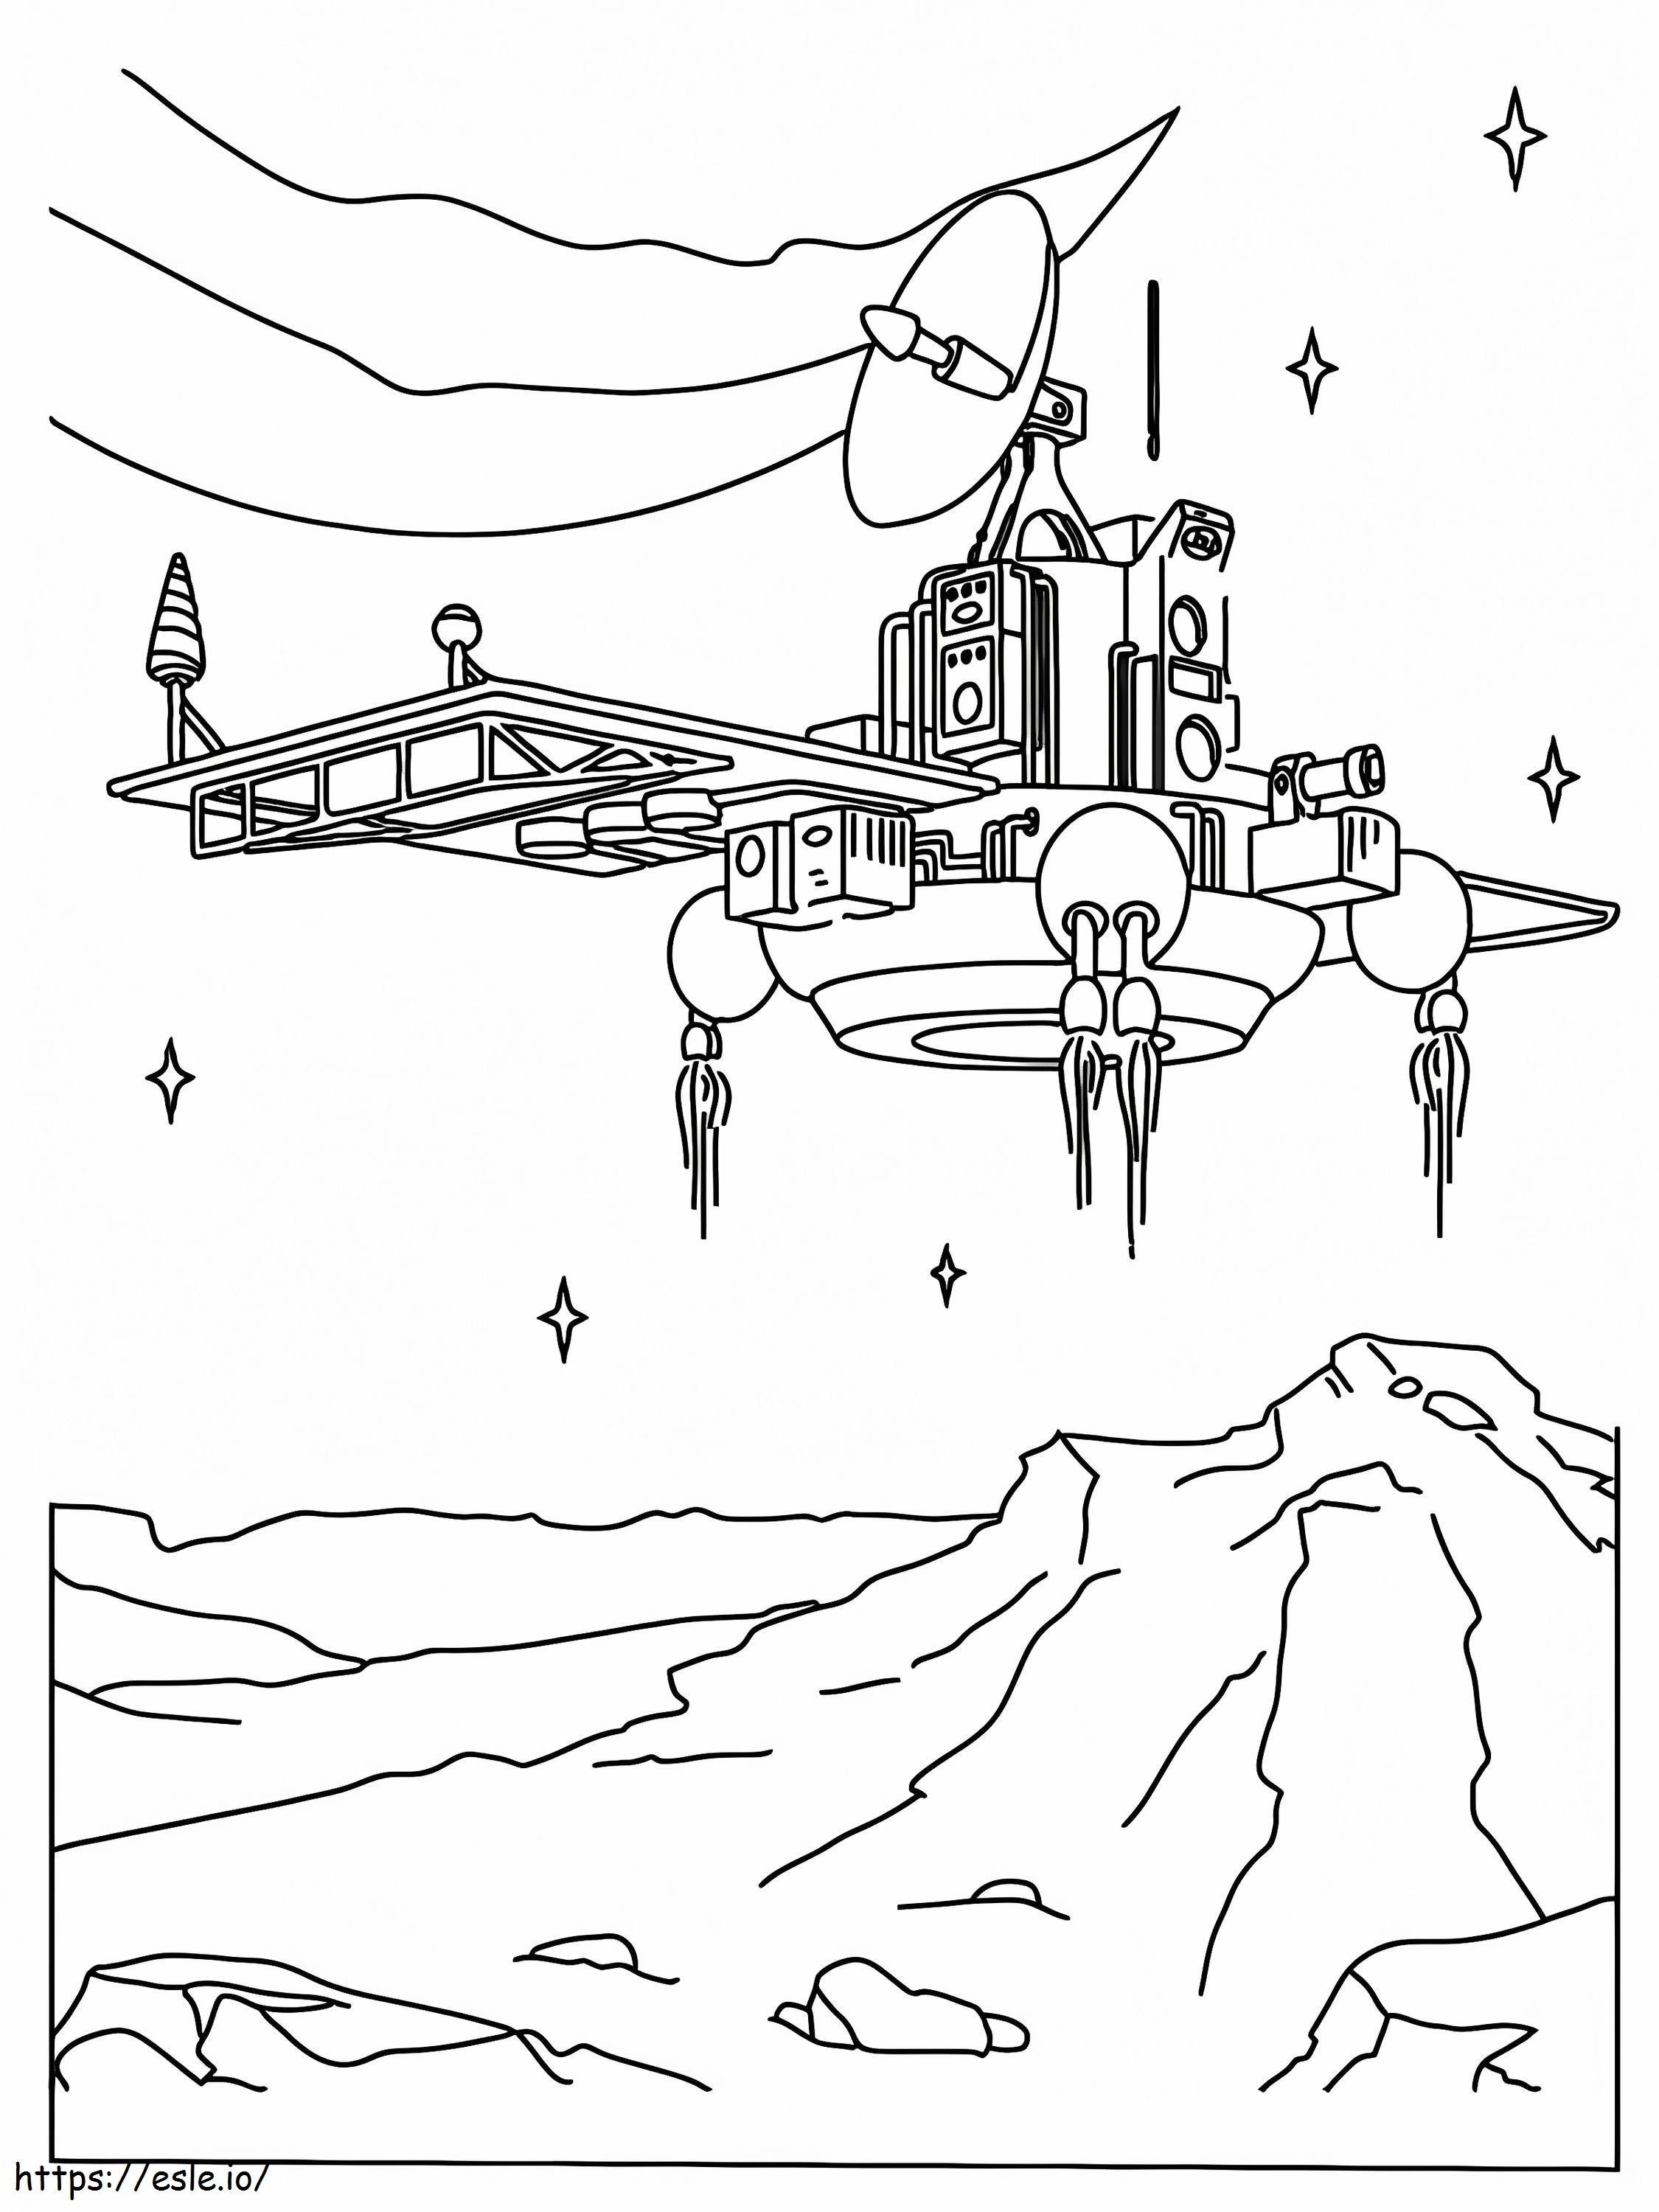 Nasa Space Observation Satellite coloring page